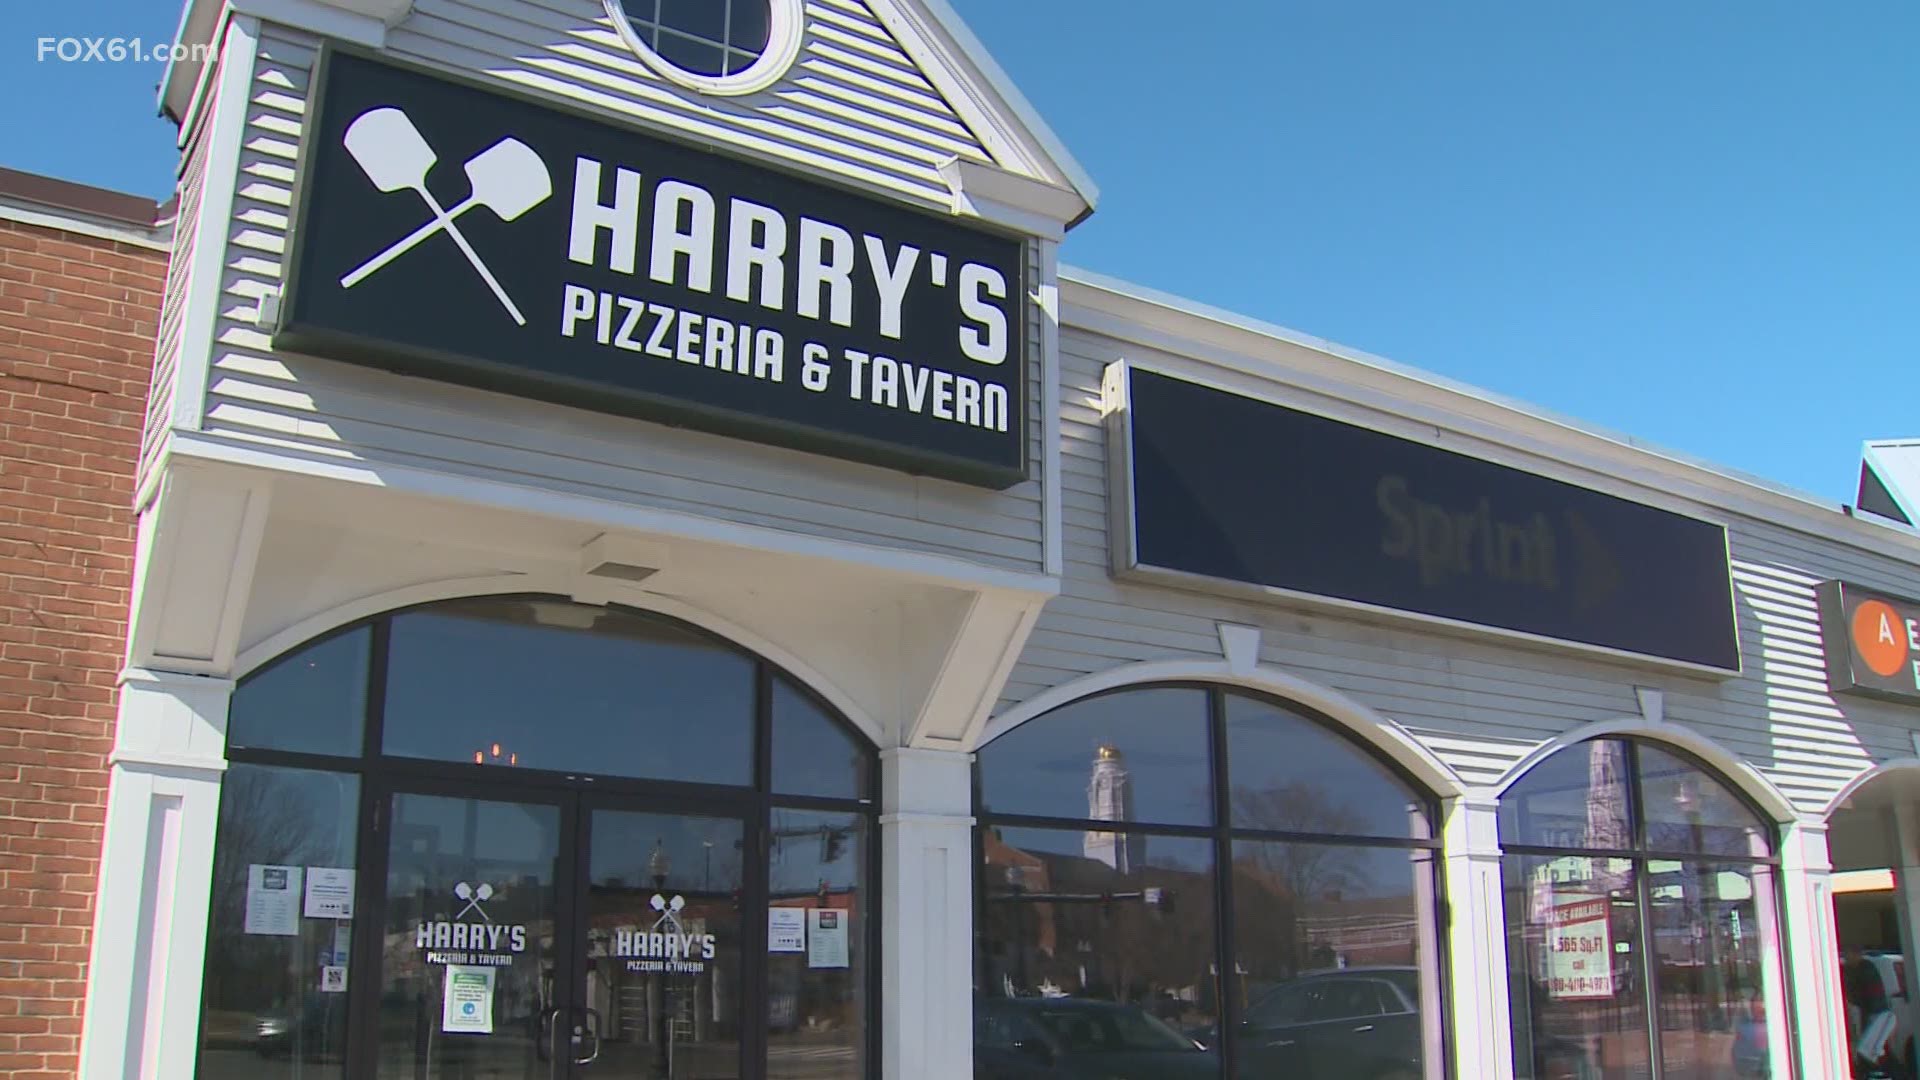 Last month, citing lease issues and the constraints of COVID-19, owner Bob Hagmaier announced Harry’s will close on Sunday.